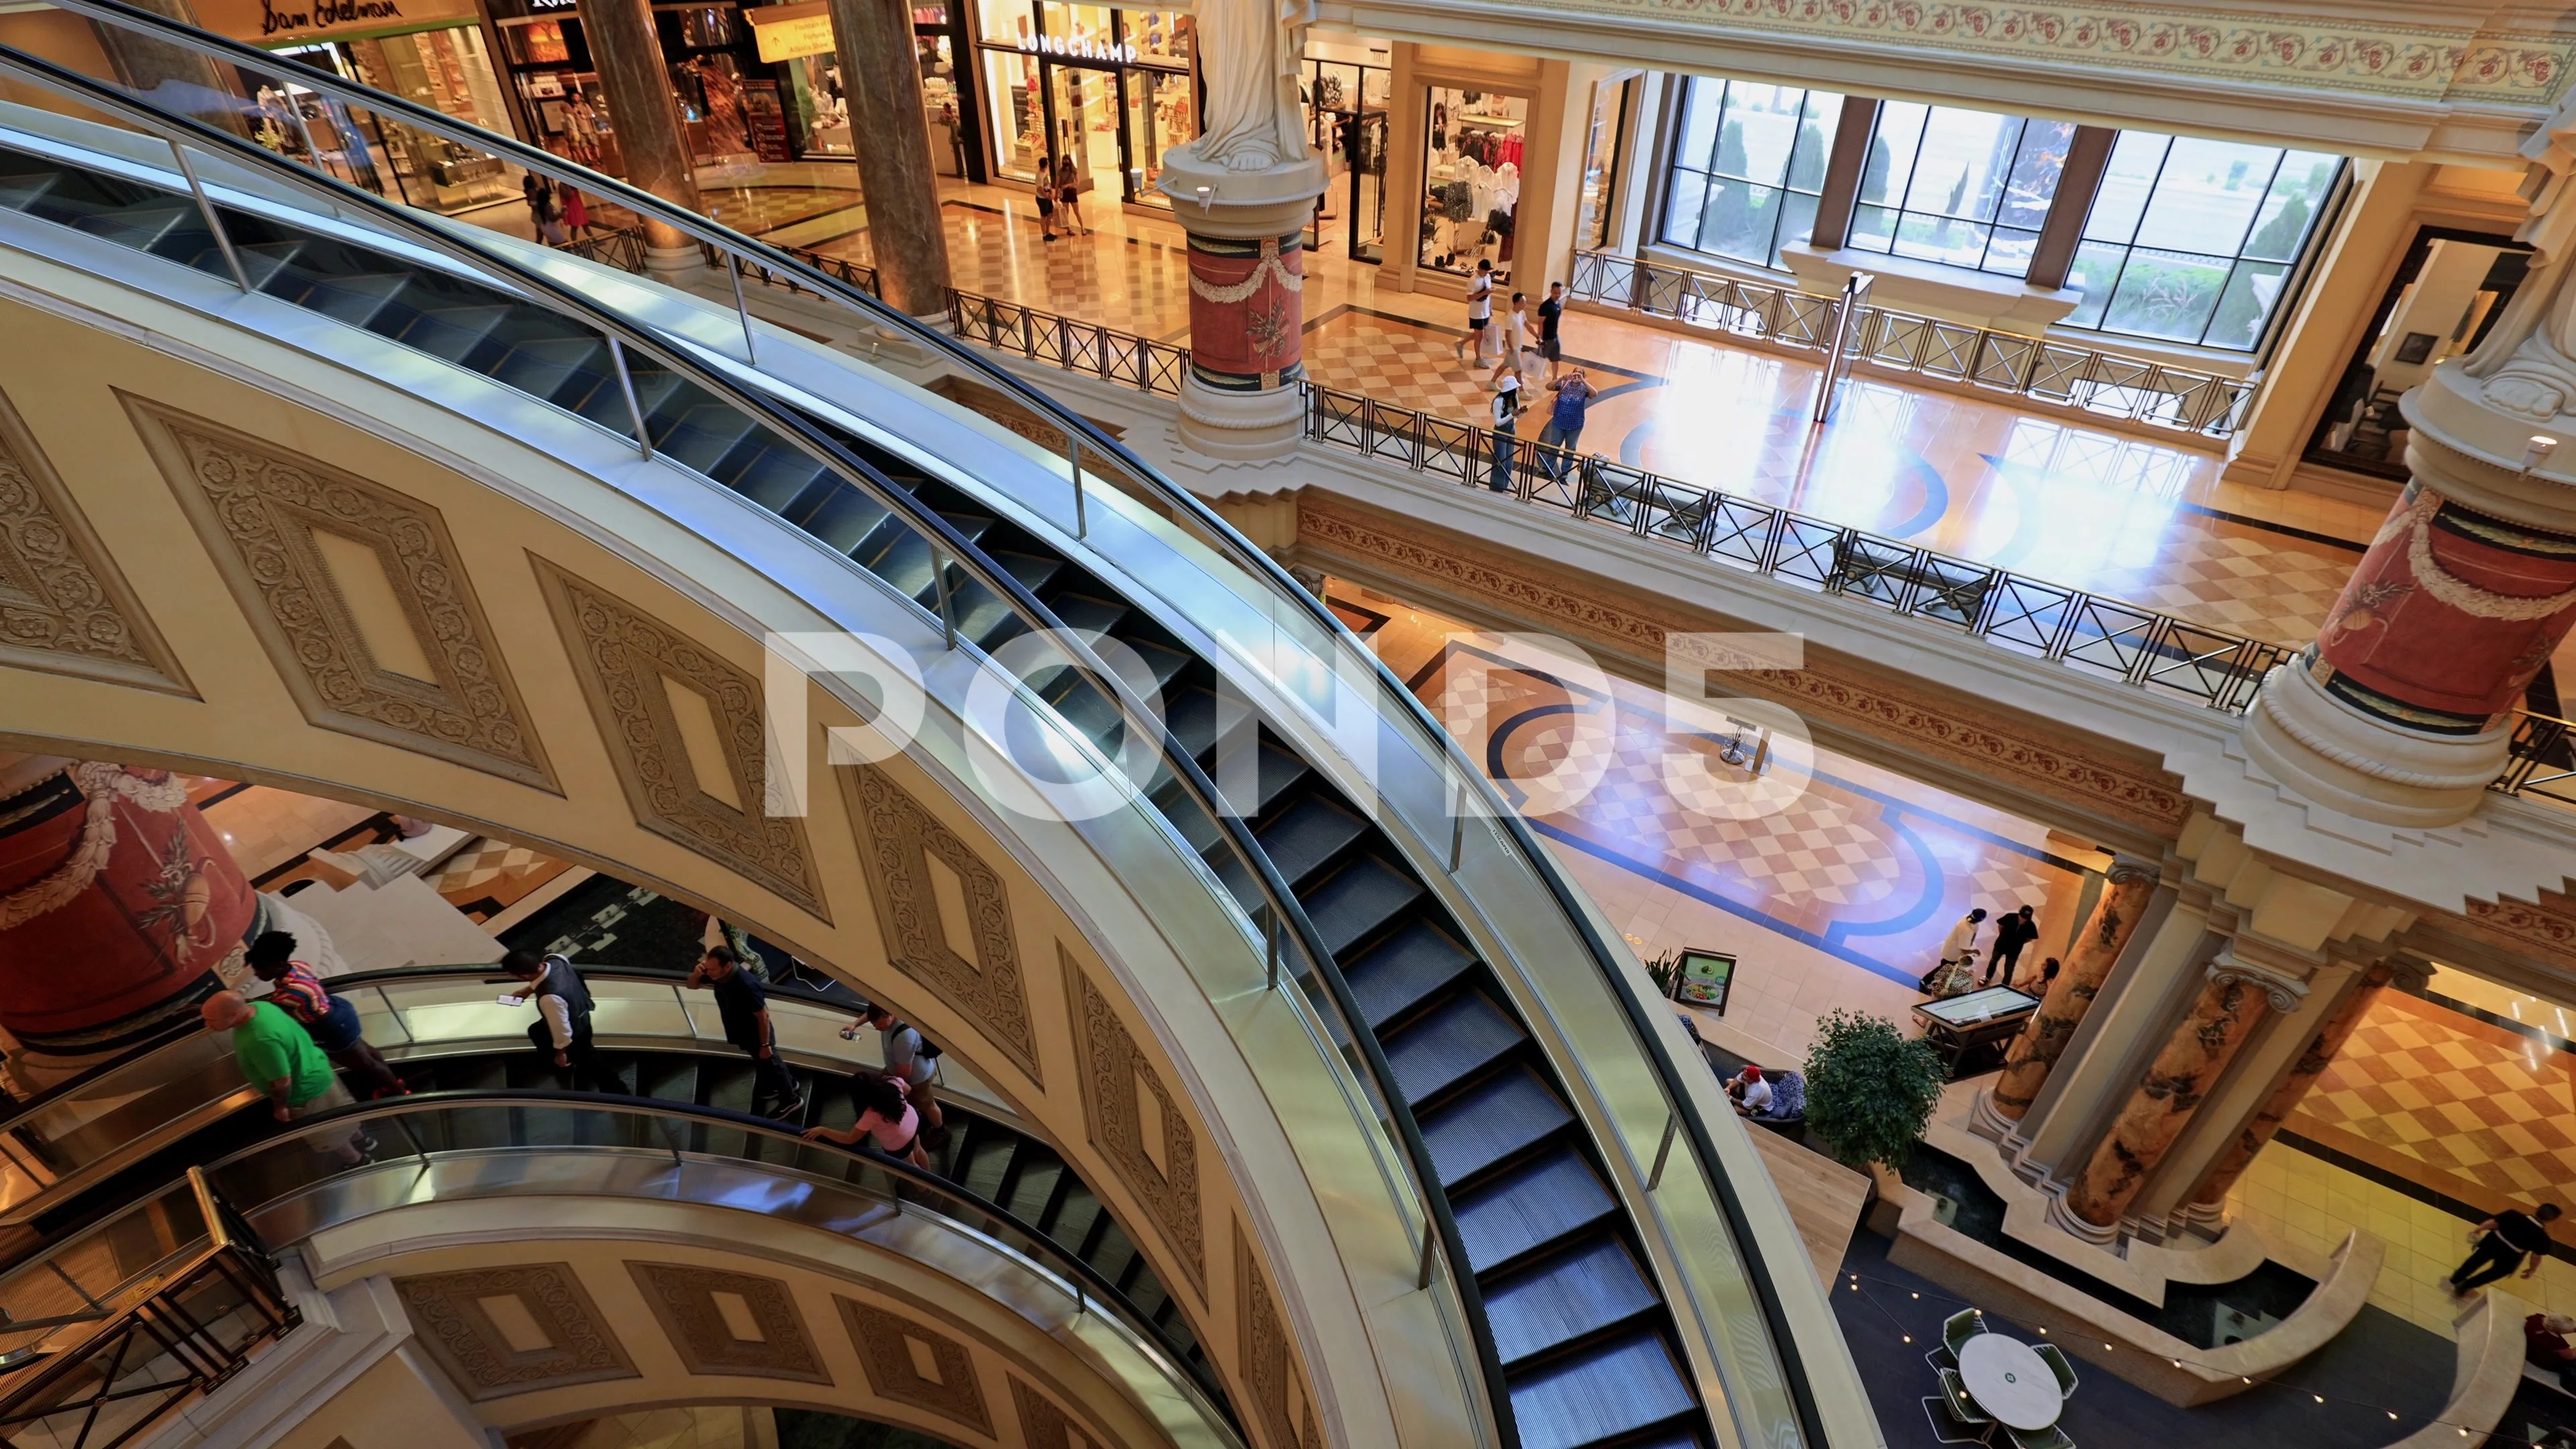 The Forum Shops, View from Second Floor at Caesars Palace in Las